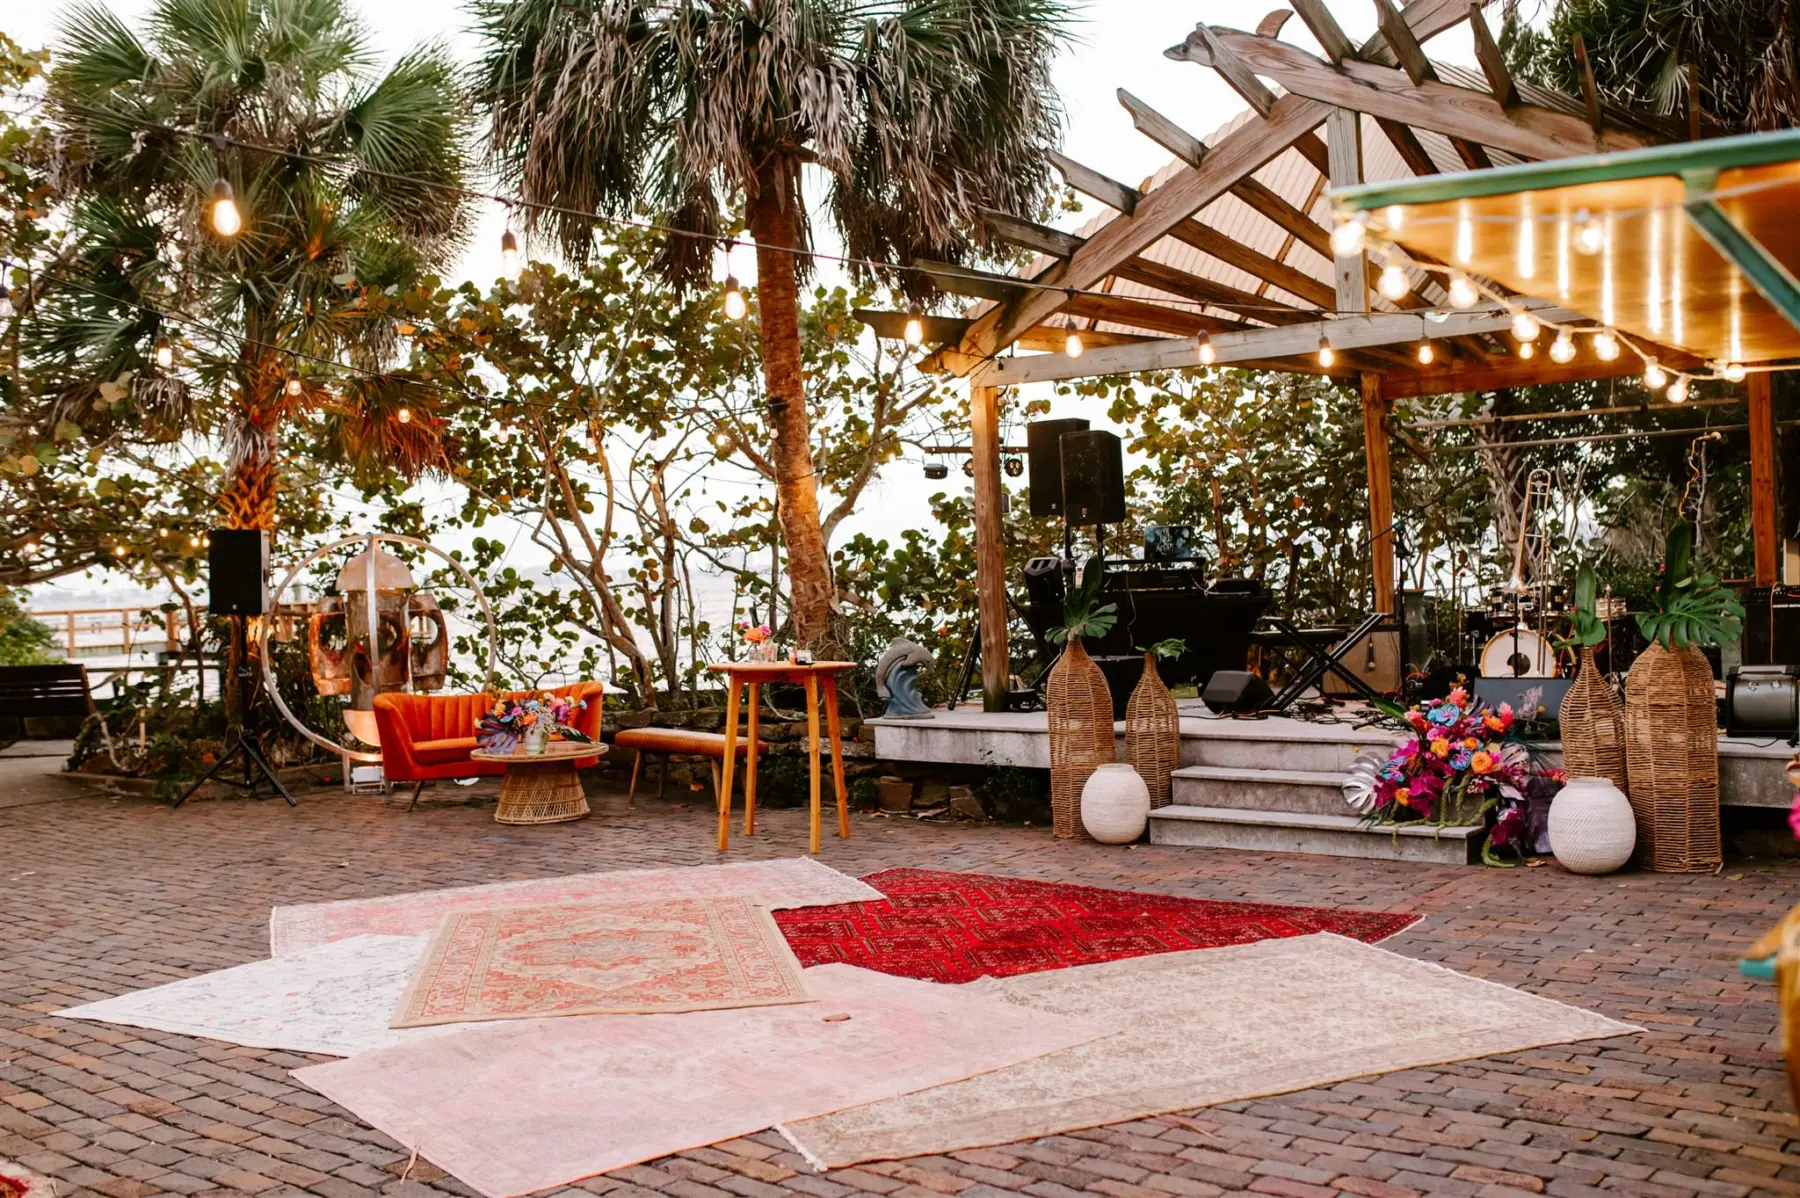 Boho Outdoor Wedding Reception with Red, Orange, and Beige Rugs Decor Ideas | Live Band Stage Inspiration | St Pete Event Planner Wilder Mind Events